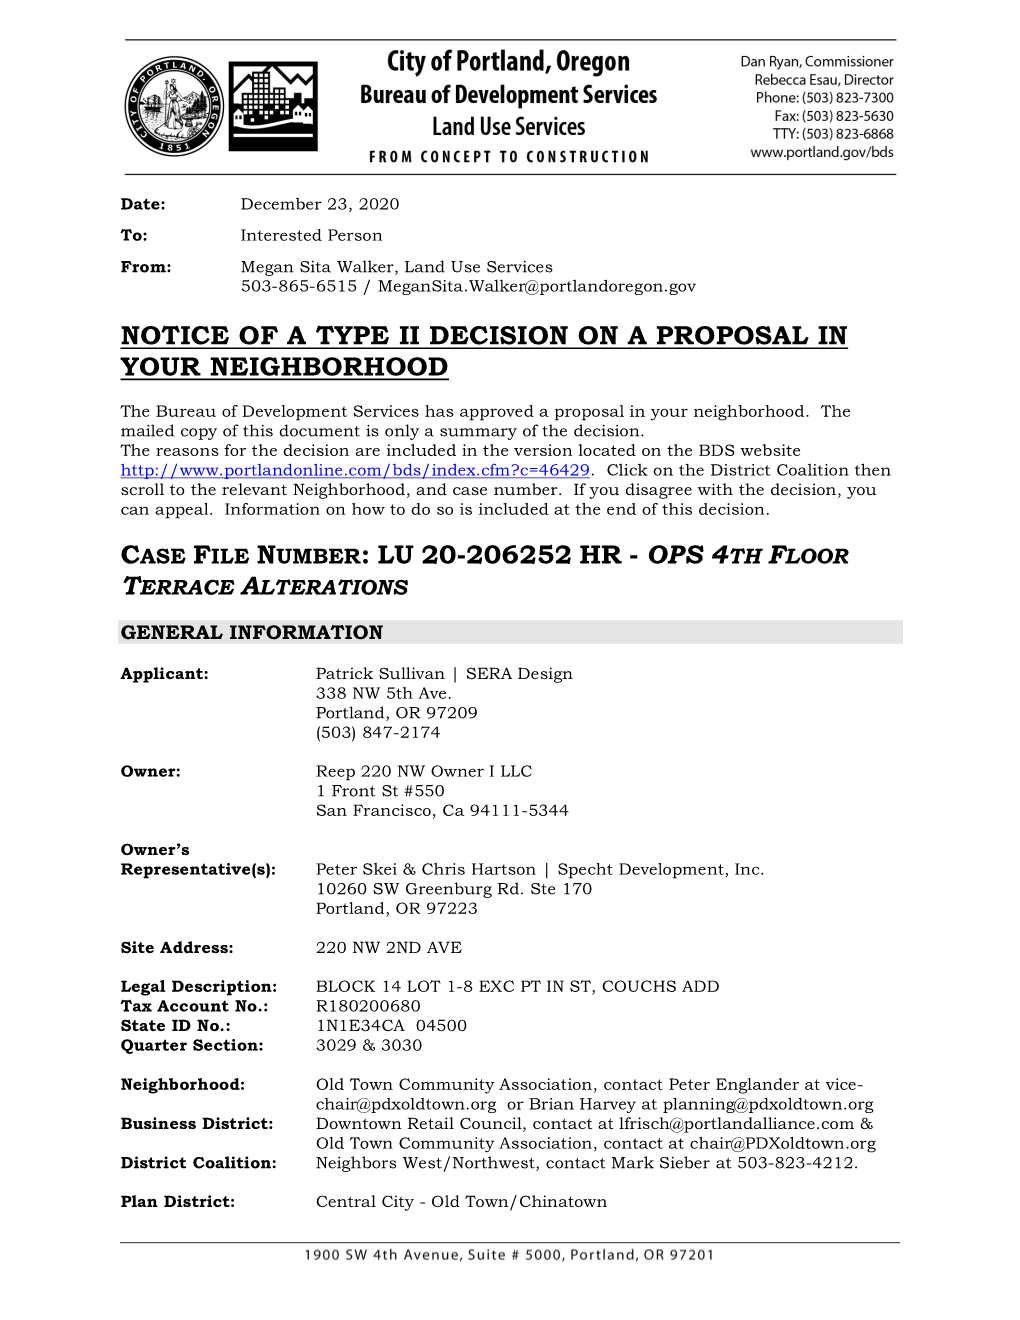 Historic Resource Review Procedure: Type II, an Administrative Decision with Appeal to the Landmarks Commission